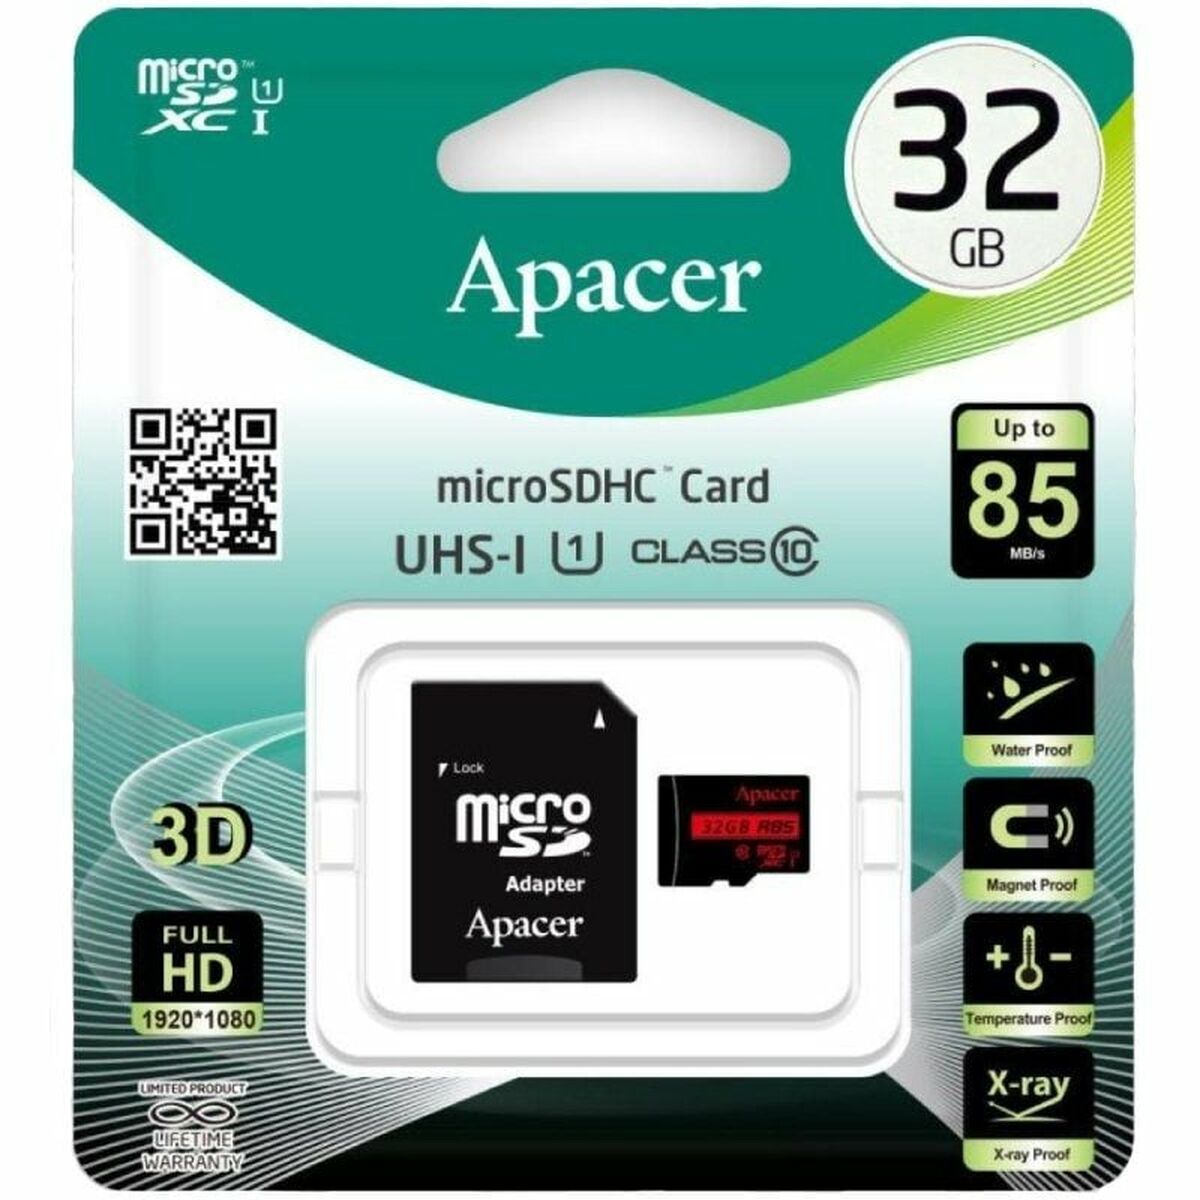 Micro SD Card Apacer AP32GMCSH10U5-R 32 GB, Apacer, Computing, Data storage, micro-sd-card-apacer-ap32gmcsh10u5-r-32-gb, Brand_Apacer, category-reference-2609, category-reference-2803, category-reference-2813, category-reference-t-19685, category-reference-t-19909, category-reference-t-21355, category-reference-t-25632, category-reference-t-29820, computers / components, Condition_NEW, Price_20 - 50, Teleworking, RiotNook